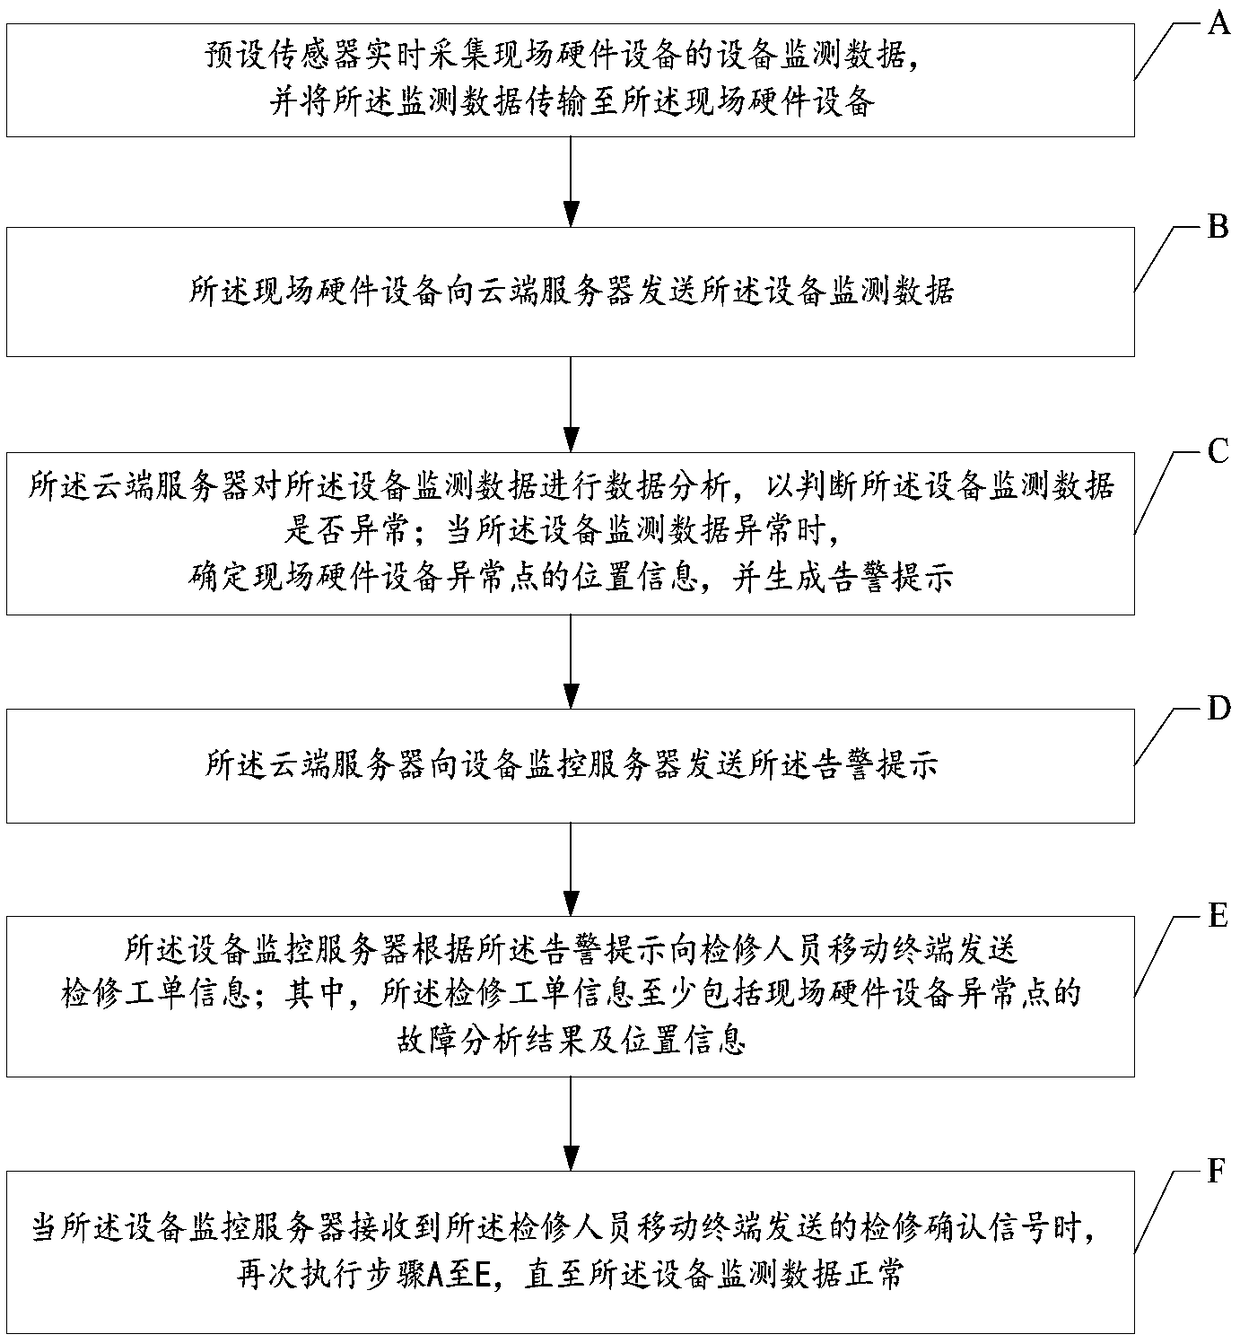 Field hardware equipment management and control system and method